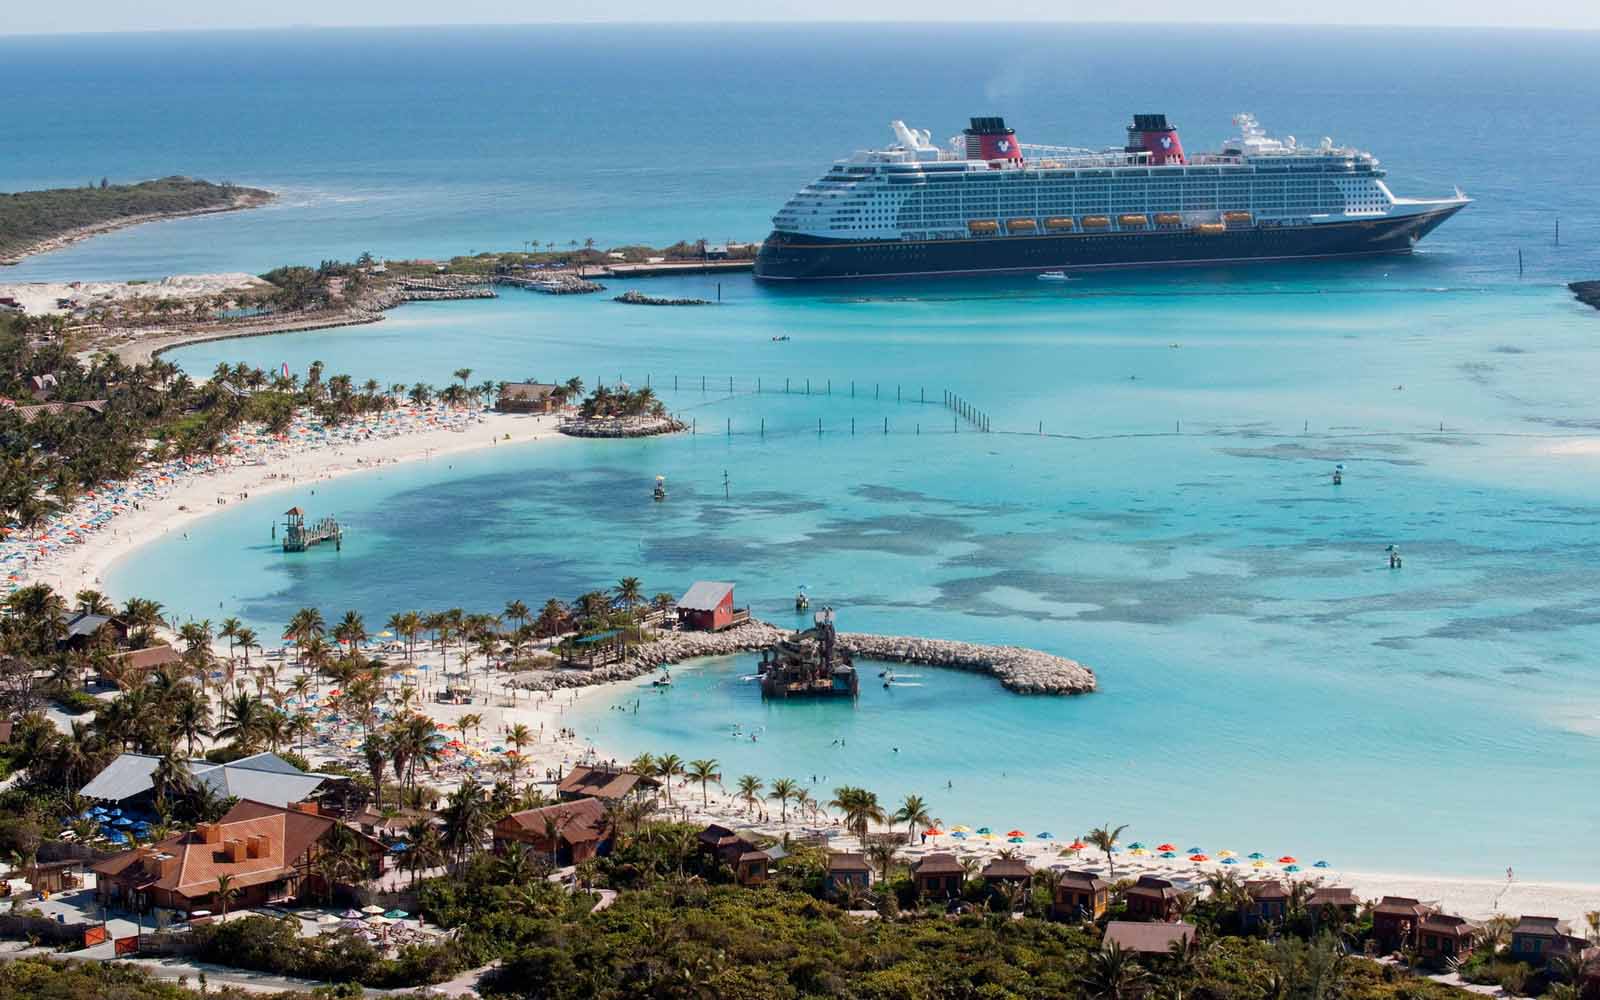 Take a Cruise in the Bahamas